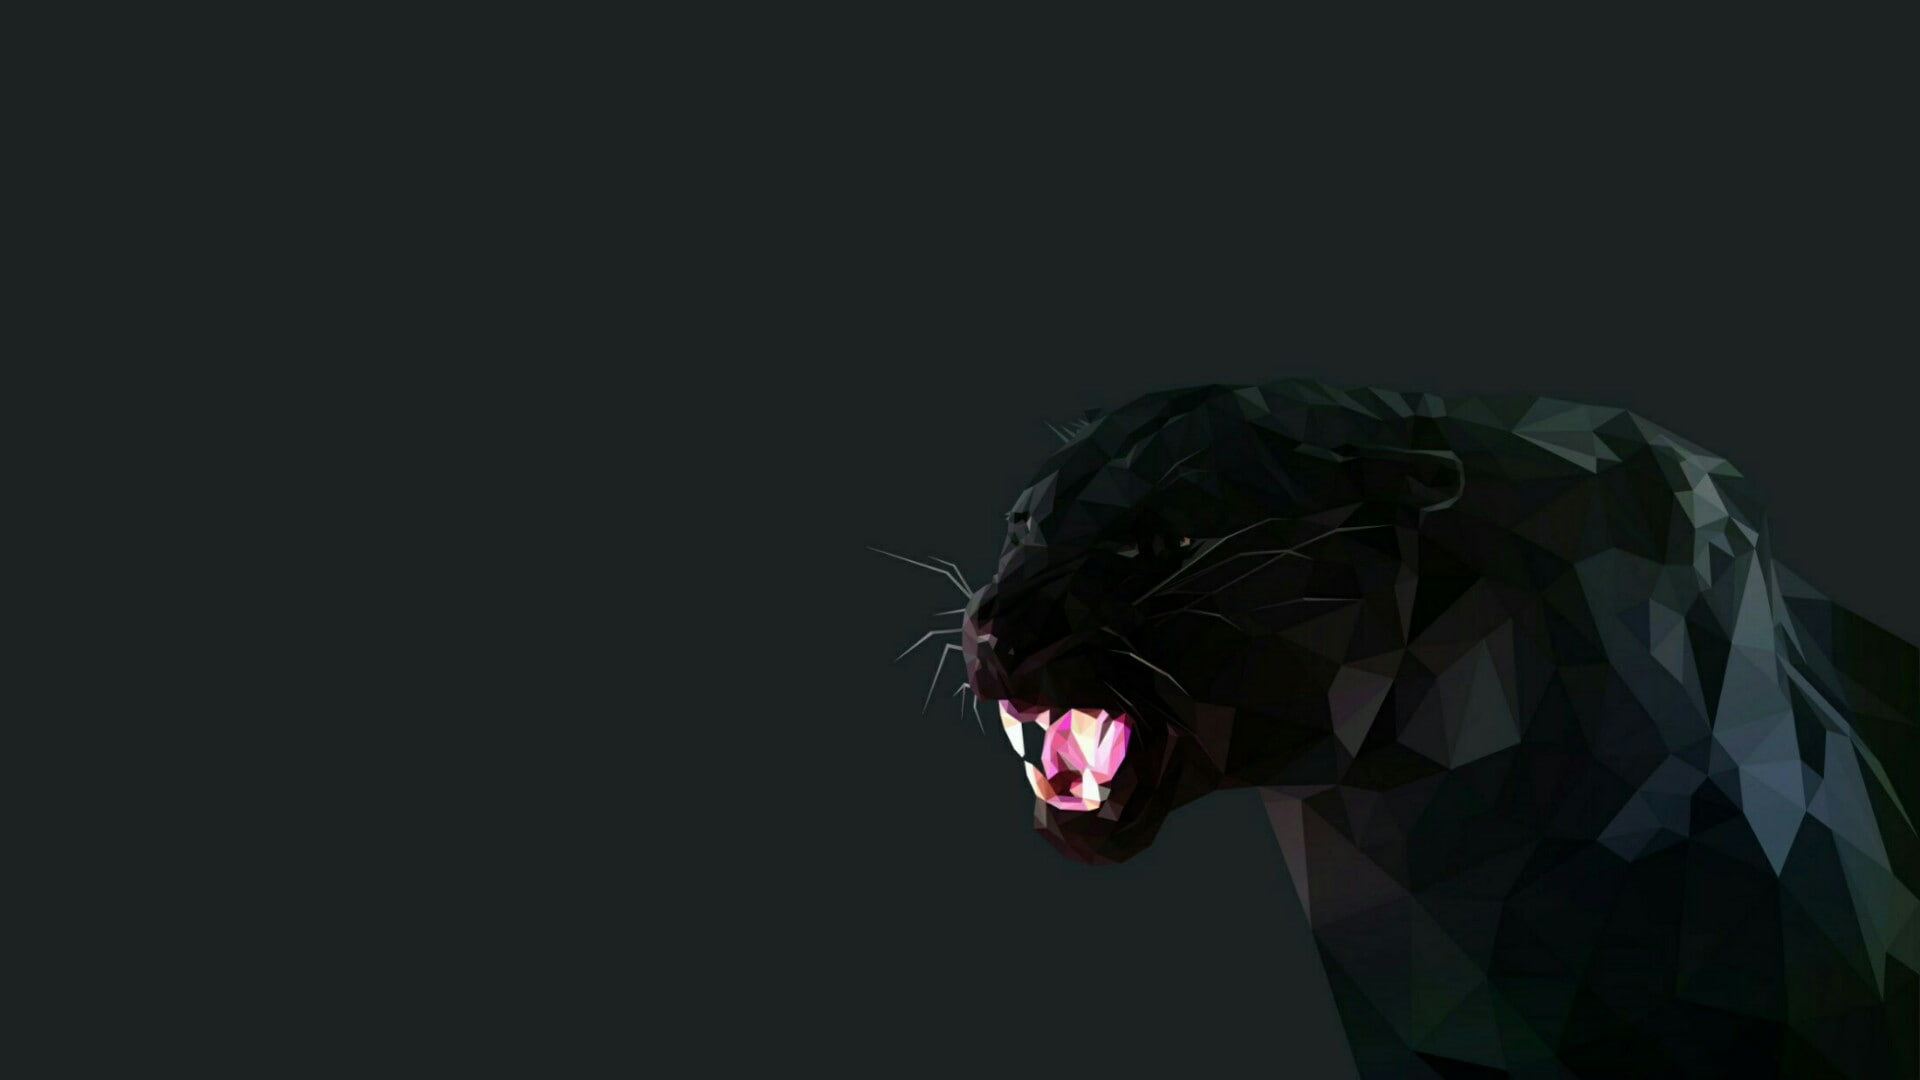 panther, lowpoly, low poly, art, graphics, artwork, black panther